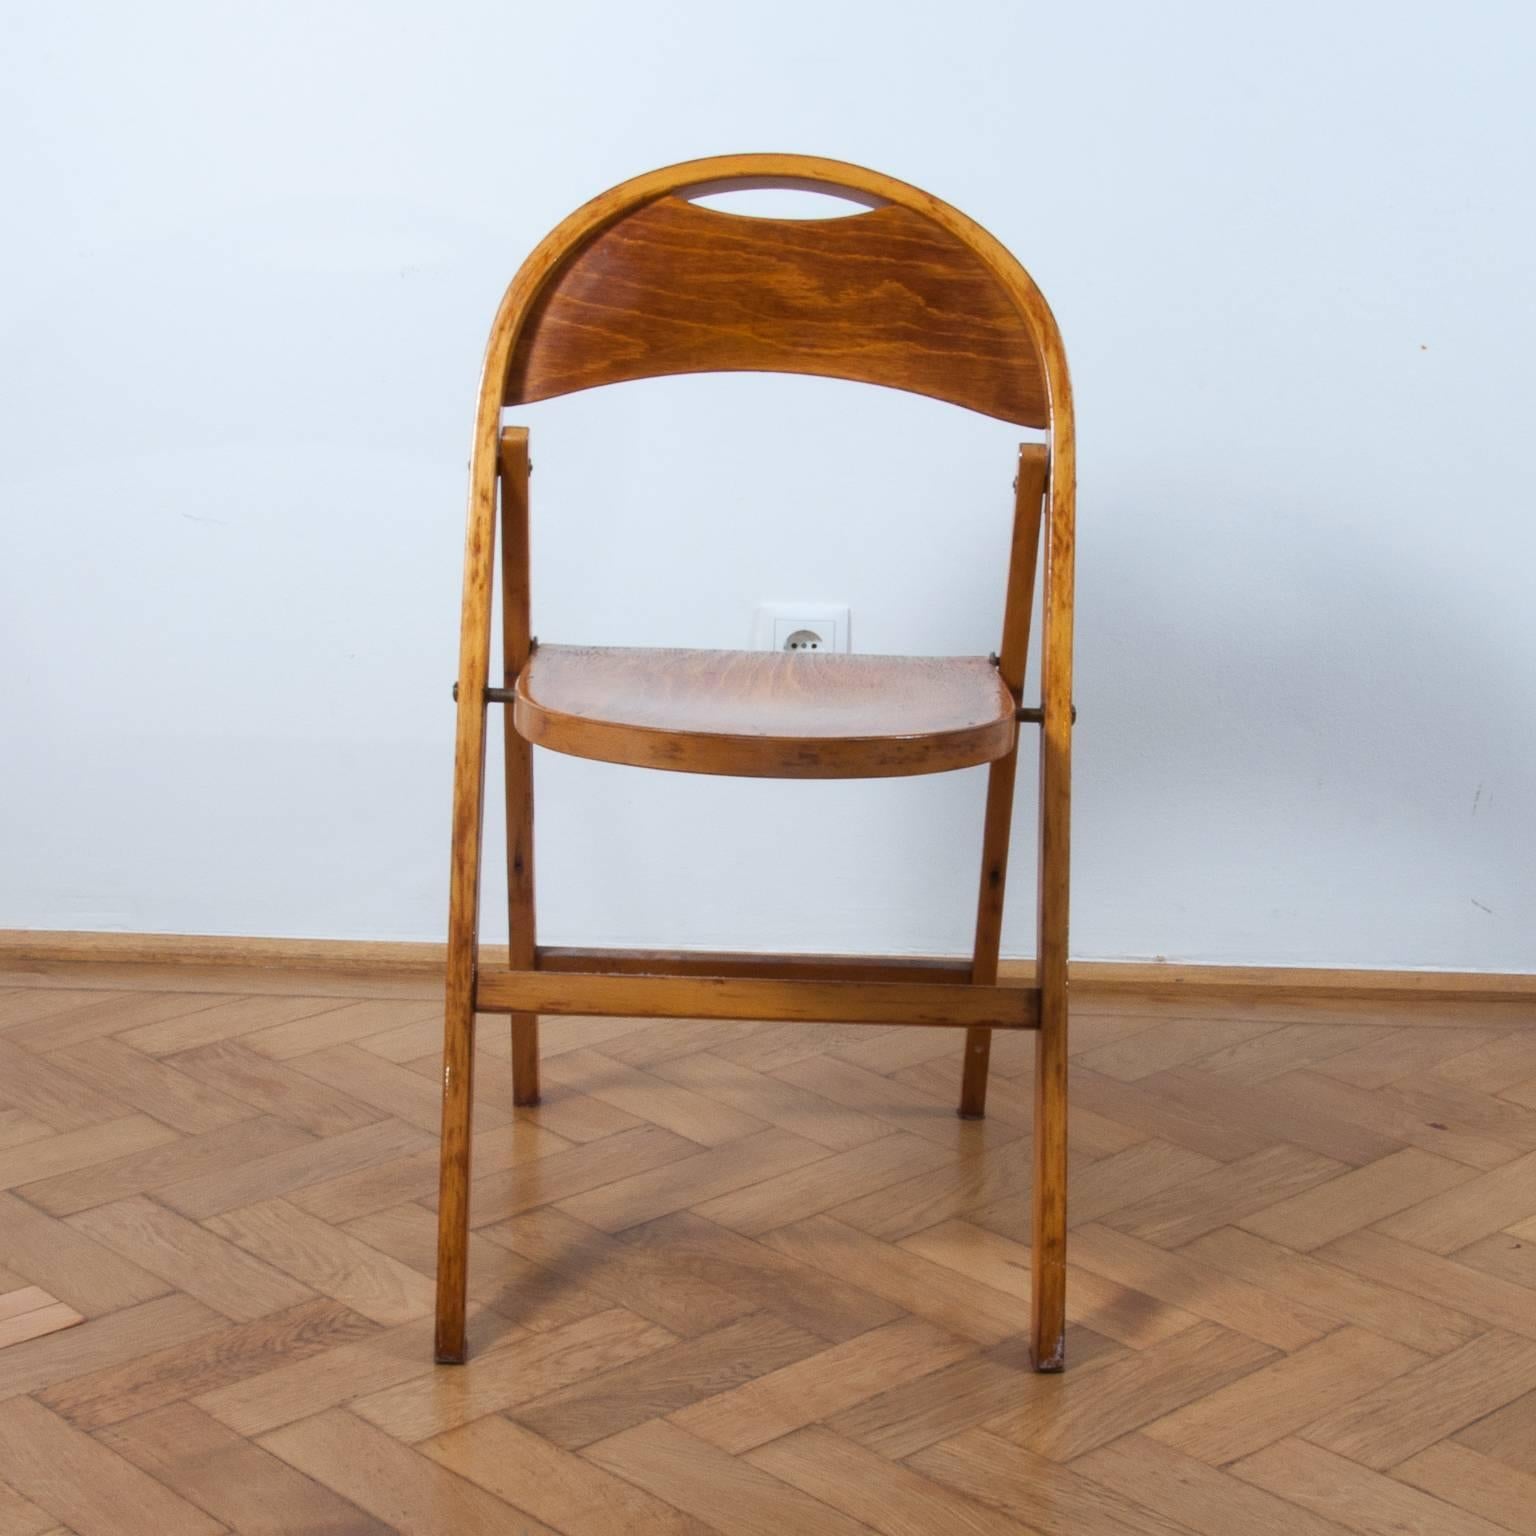 Austrian Thonet 751 Folding Chair Very Functional and Collectable, Classic Jugendstil For Sale